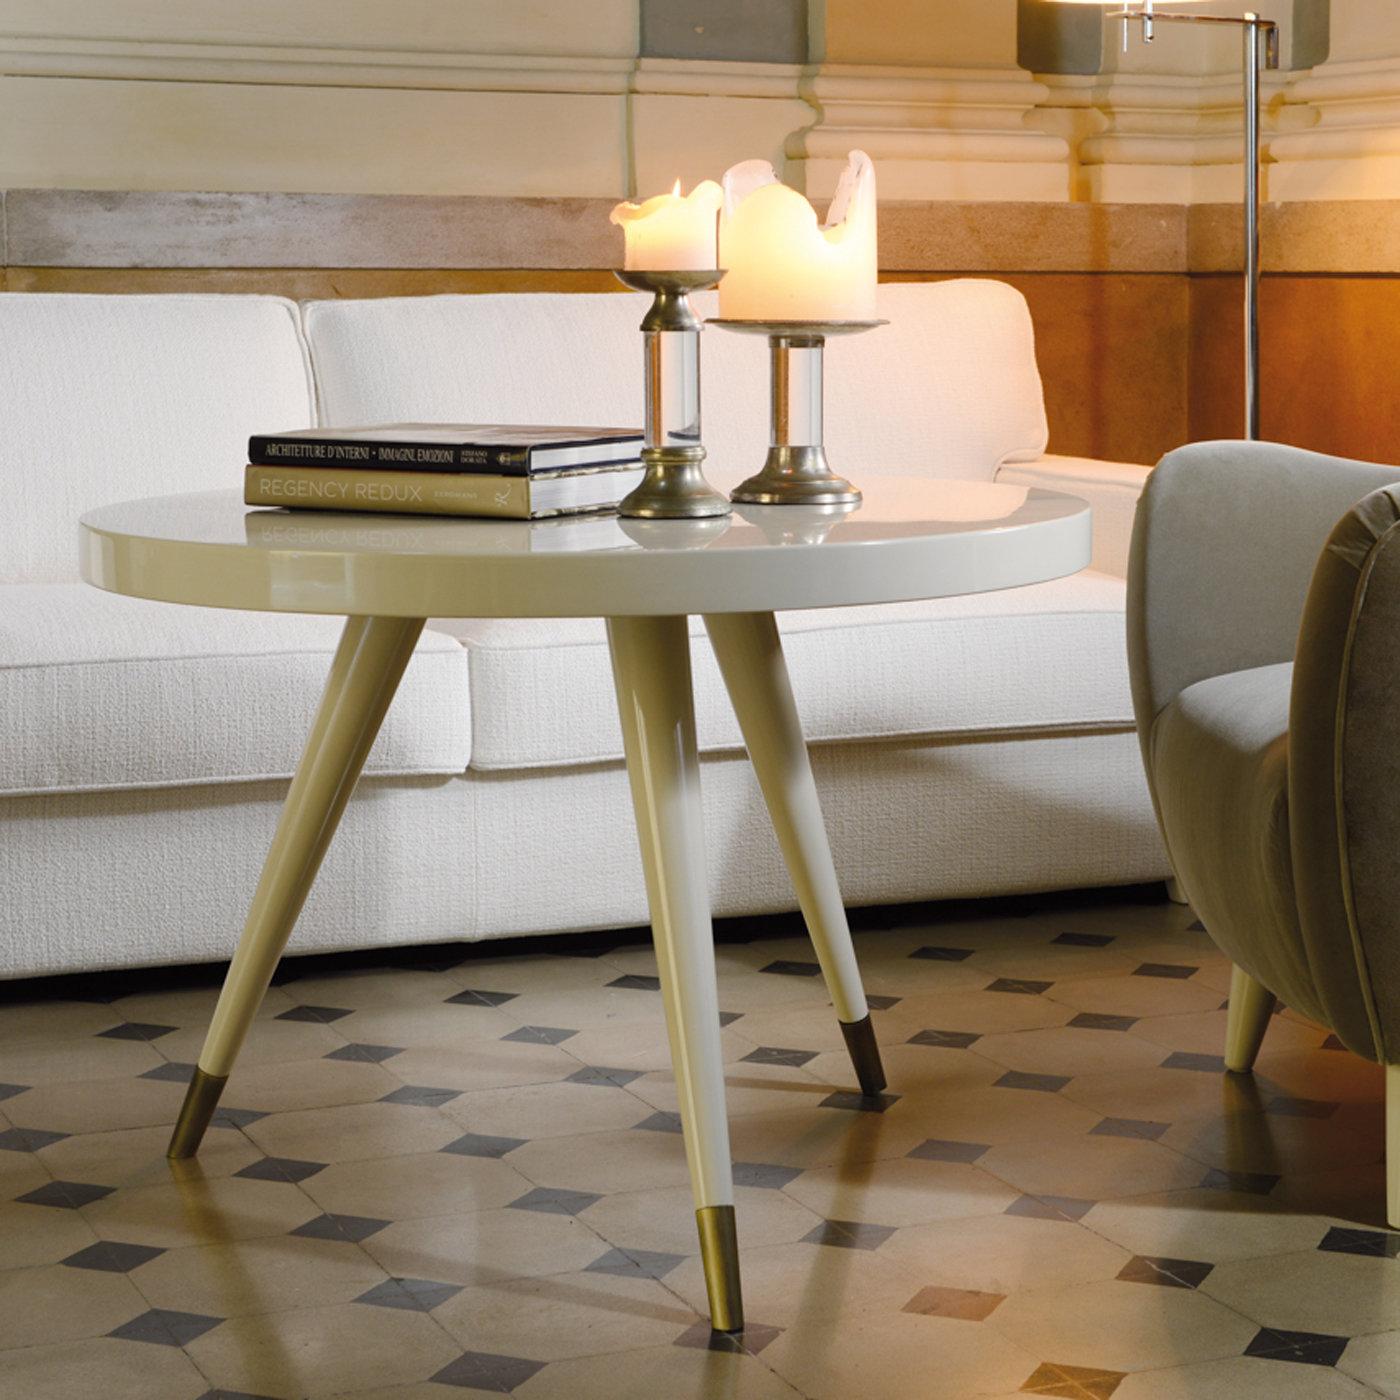 A stunning complement to a modern home, this refined side table is part of the most prestigious collection by DOM Edizioni designed by Domenico Mula. The charming silhouette features a wooden frame with an ivory, glossy lacquer that pairs well with